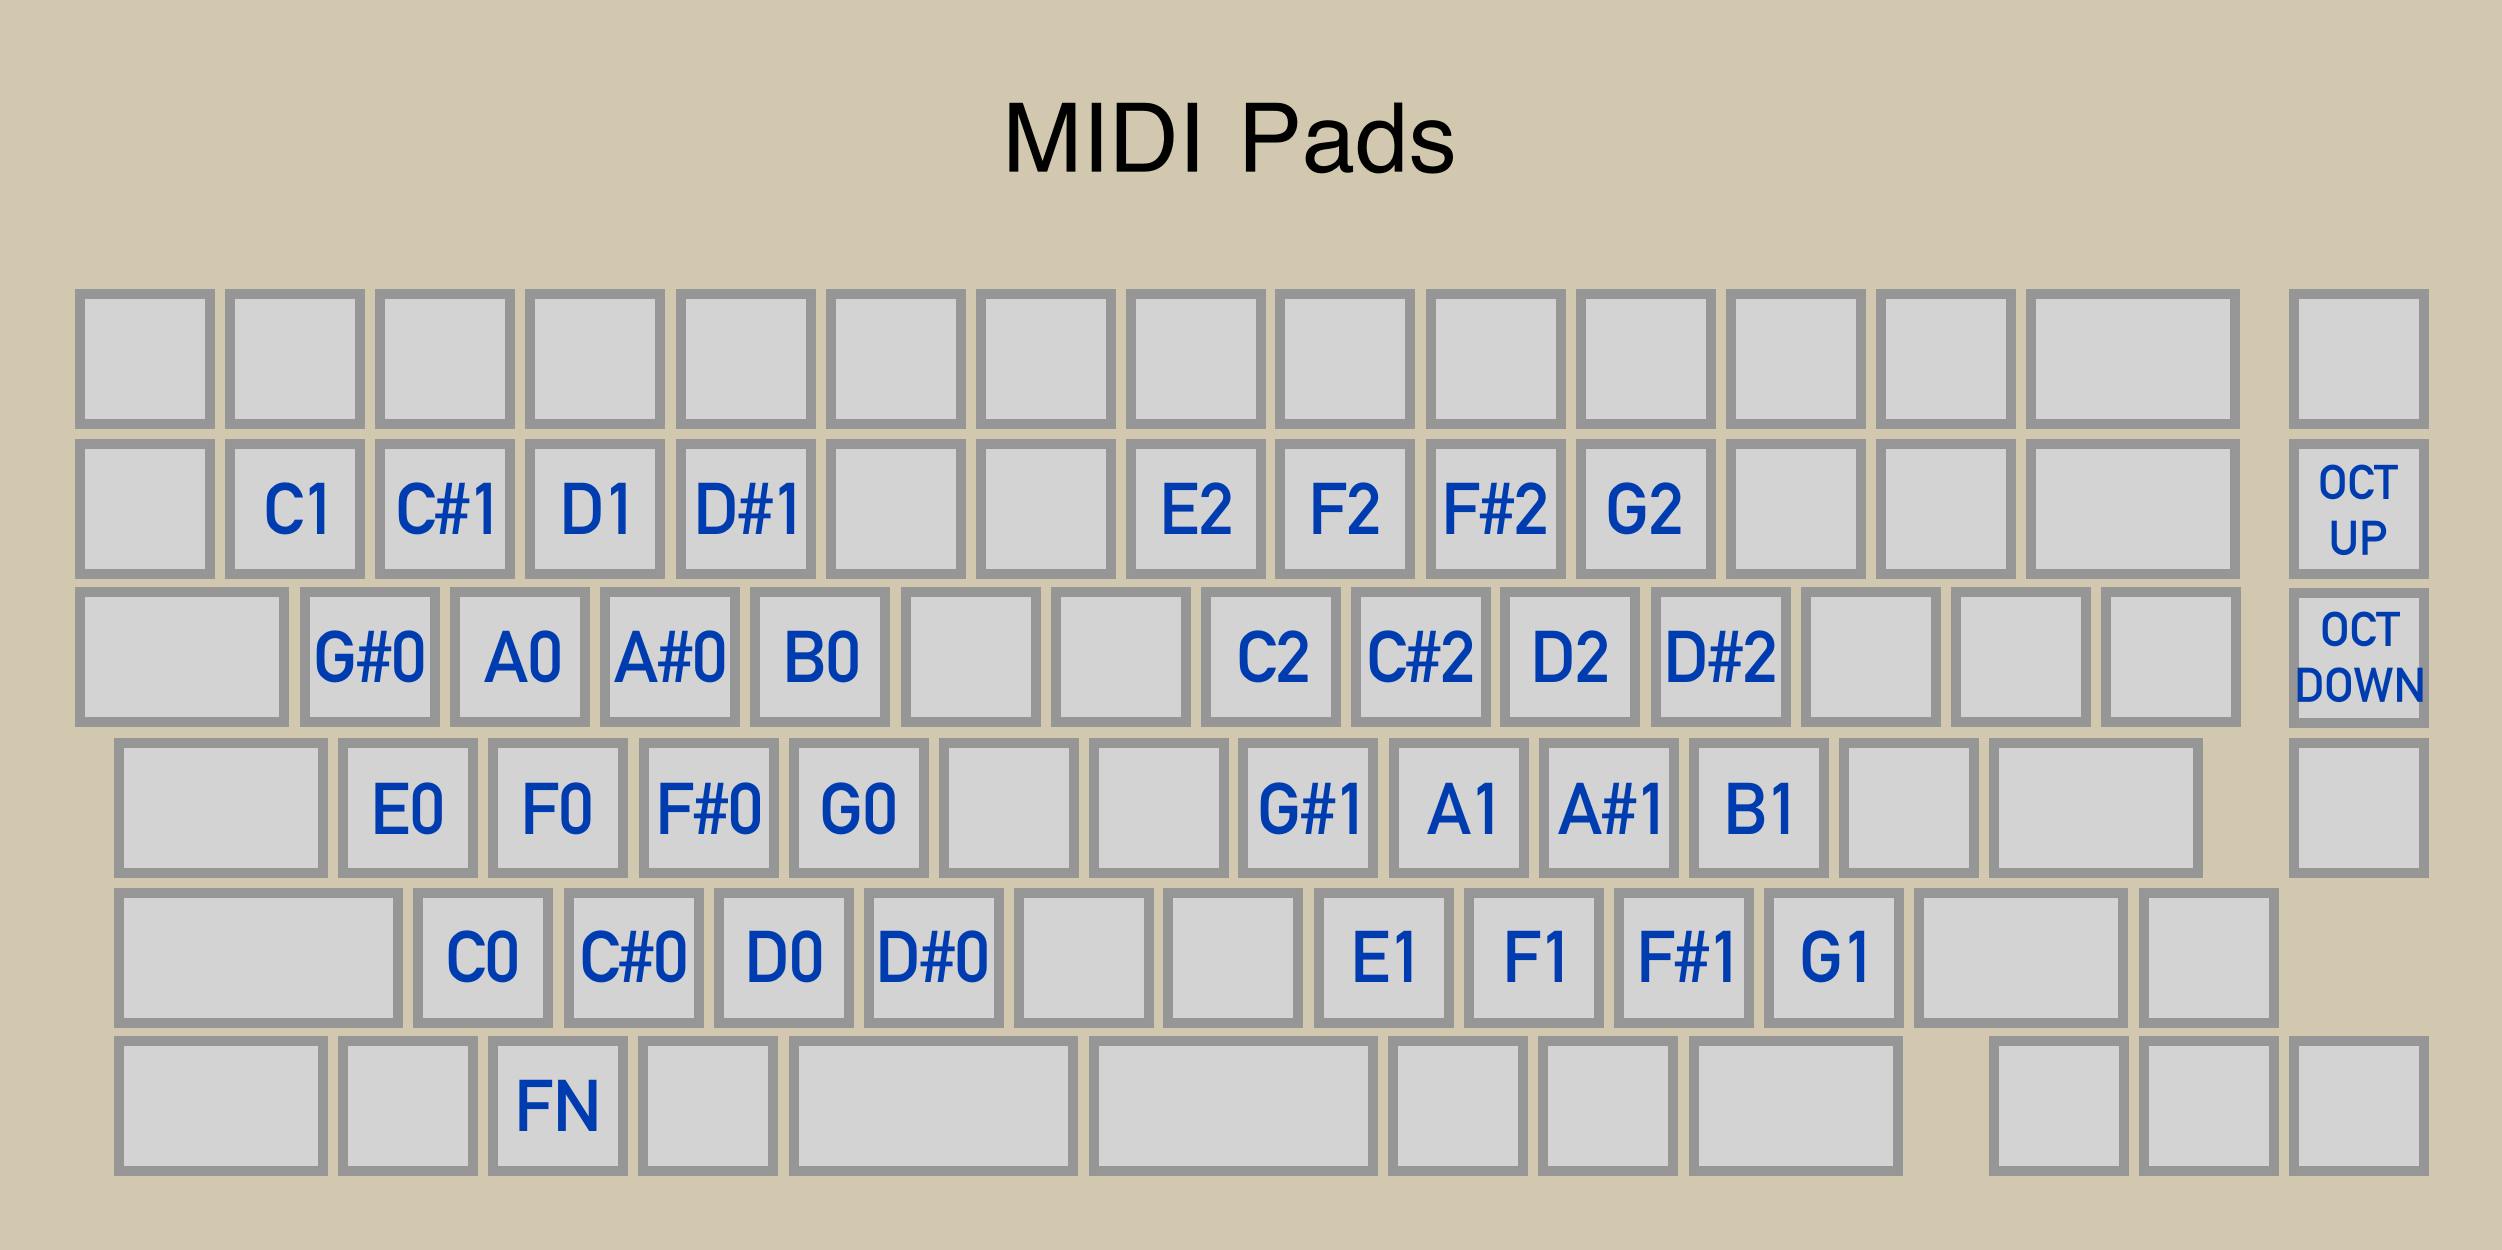 Legend showing 32 drum pads laid out in two 16-key grids